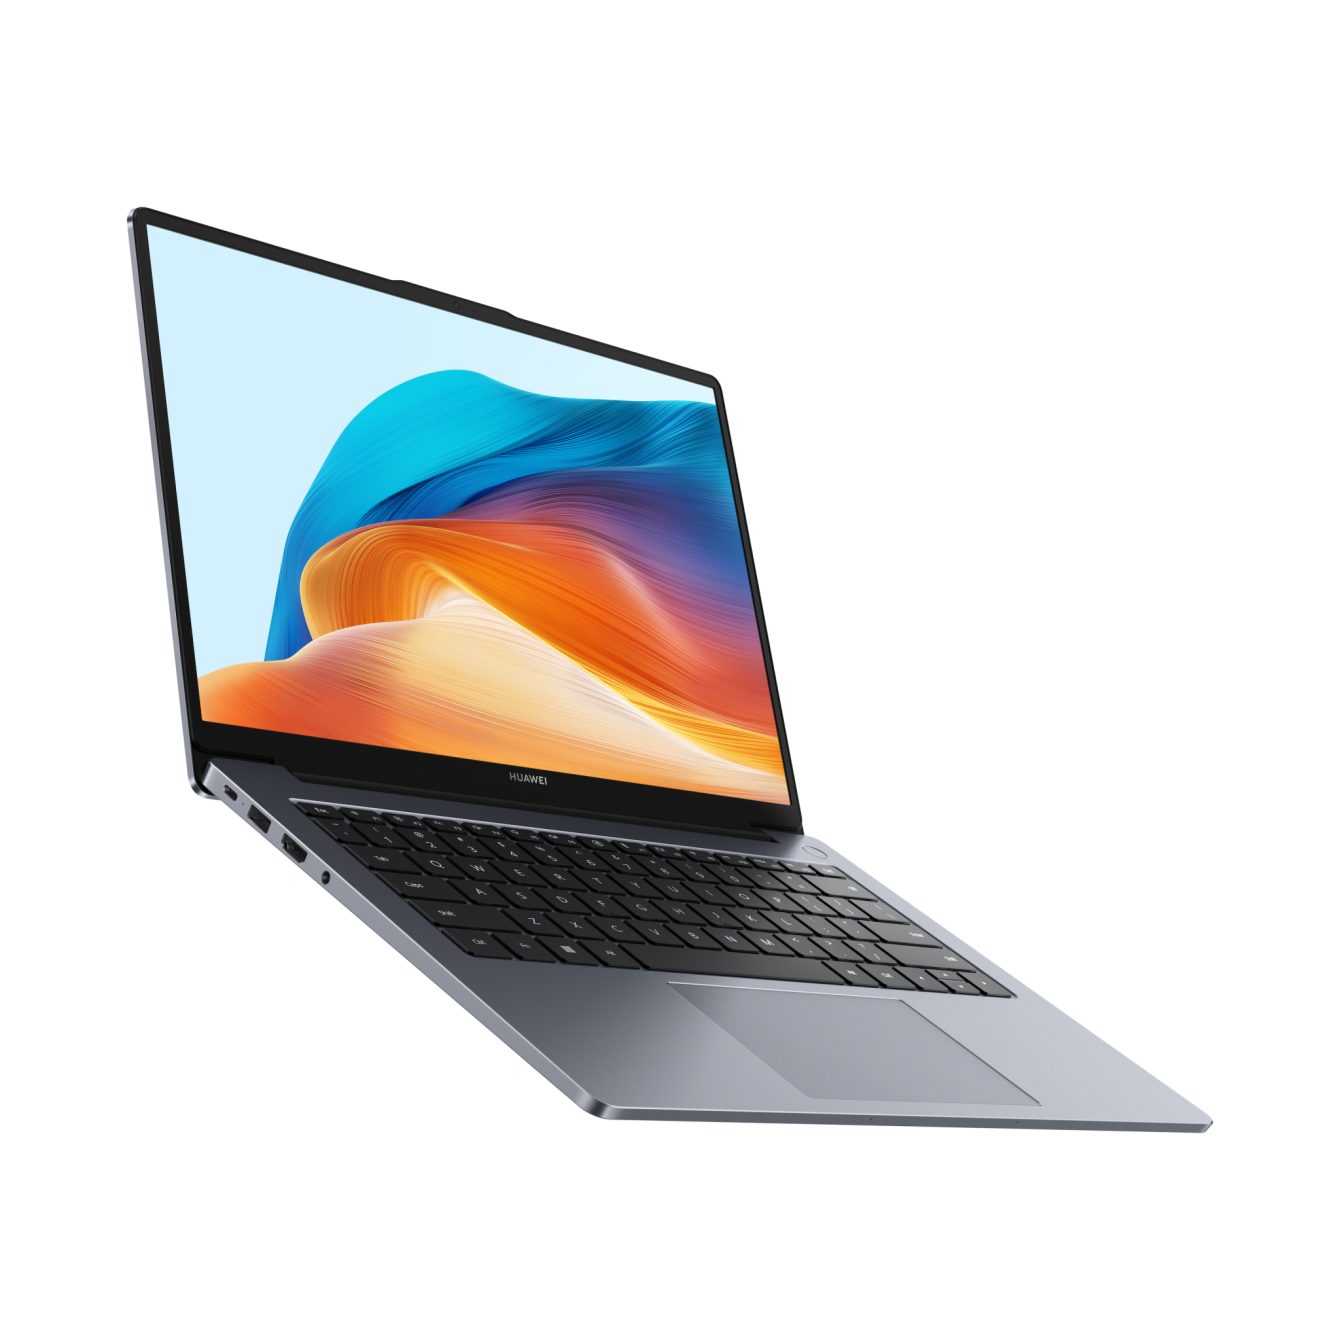 Huawei presents the MateBook D 14 with Super Device